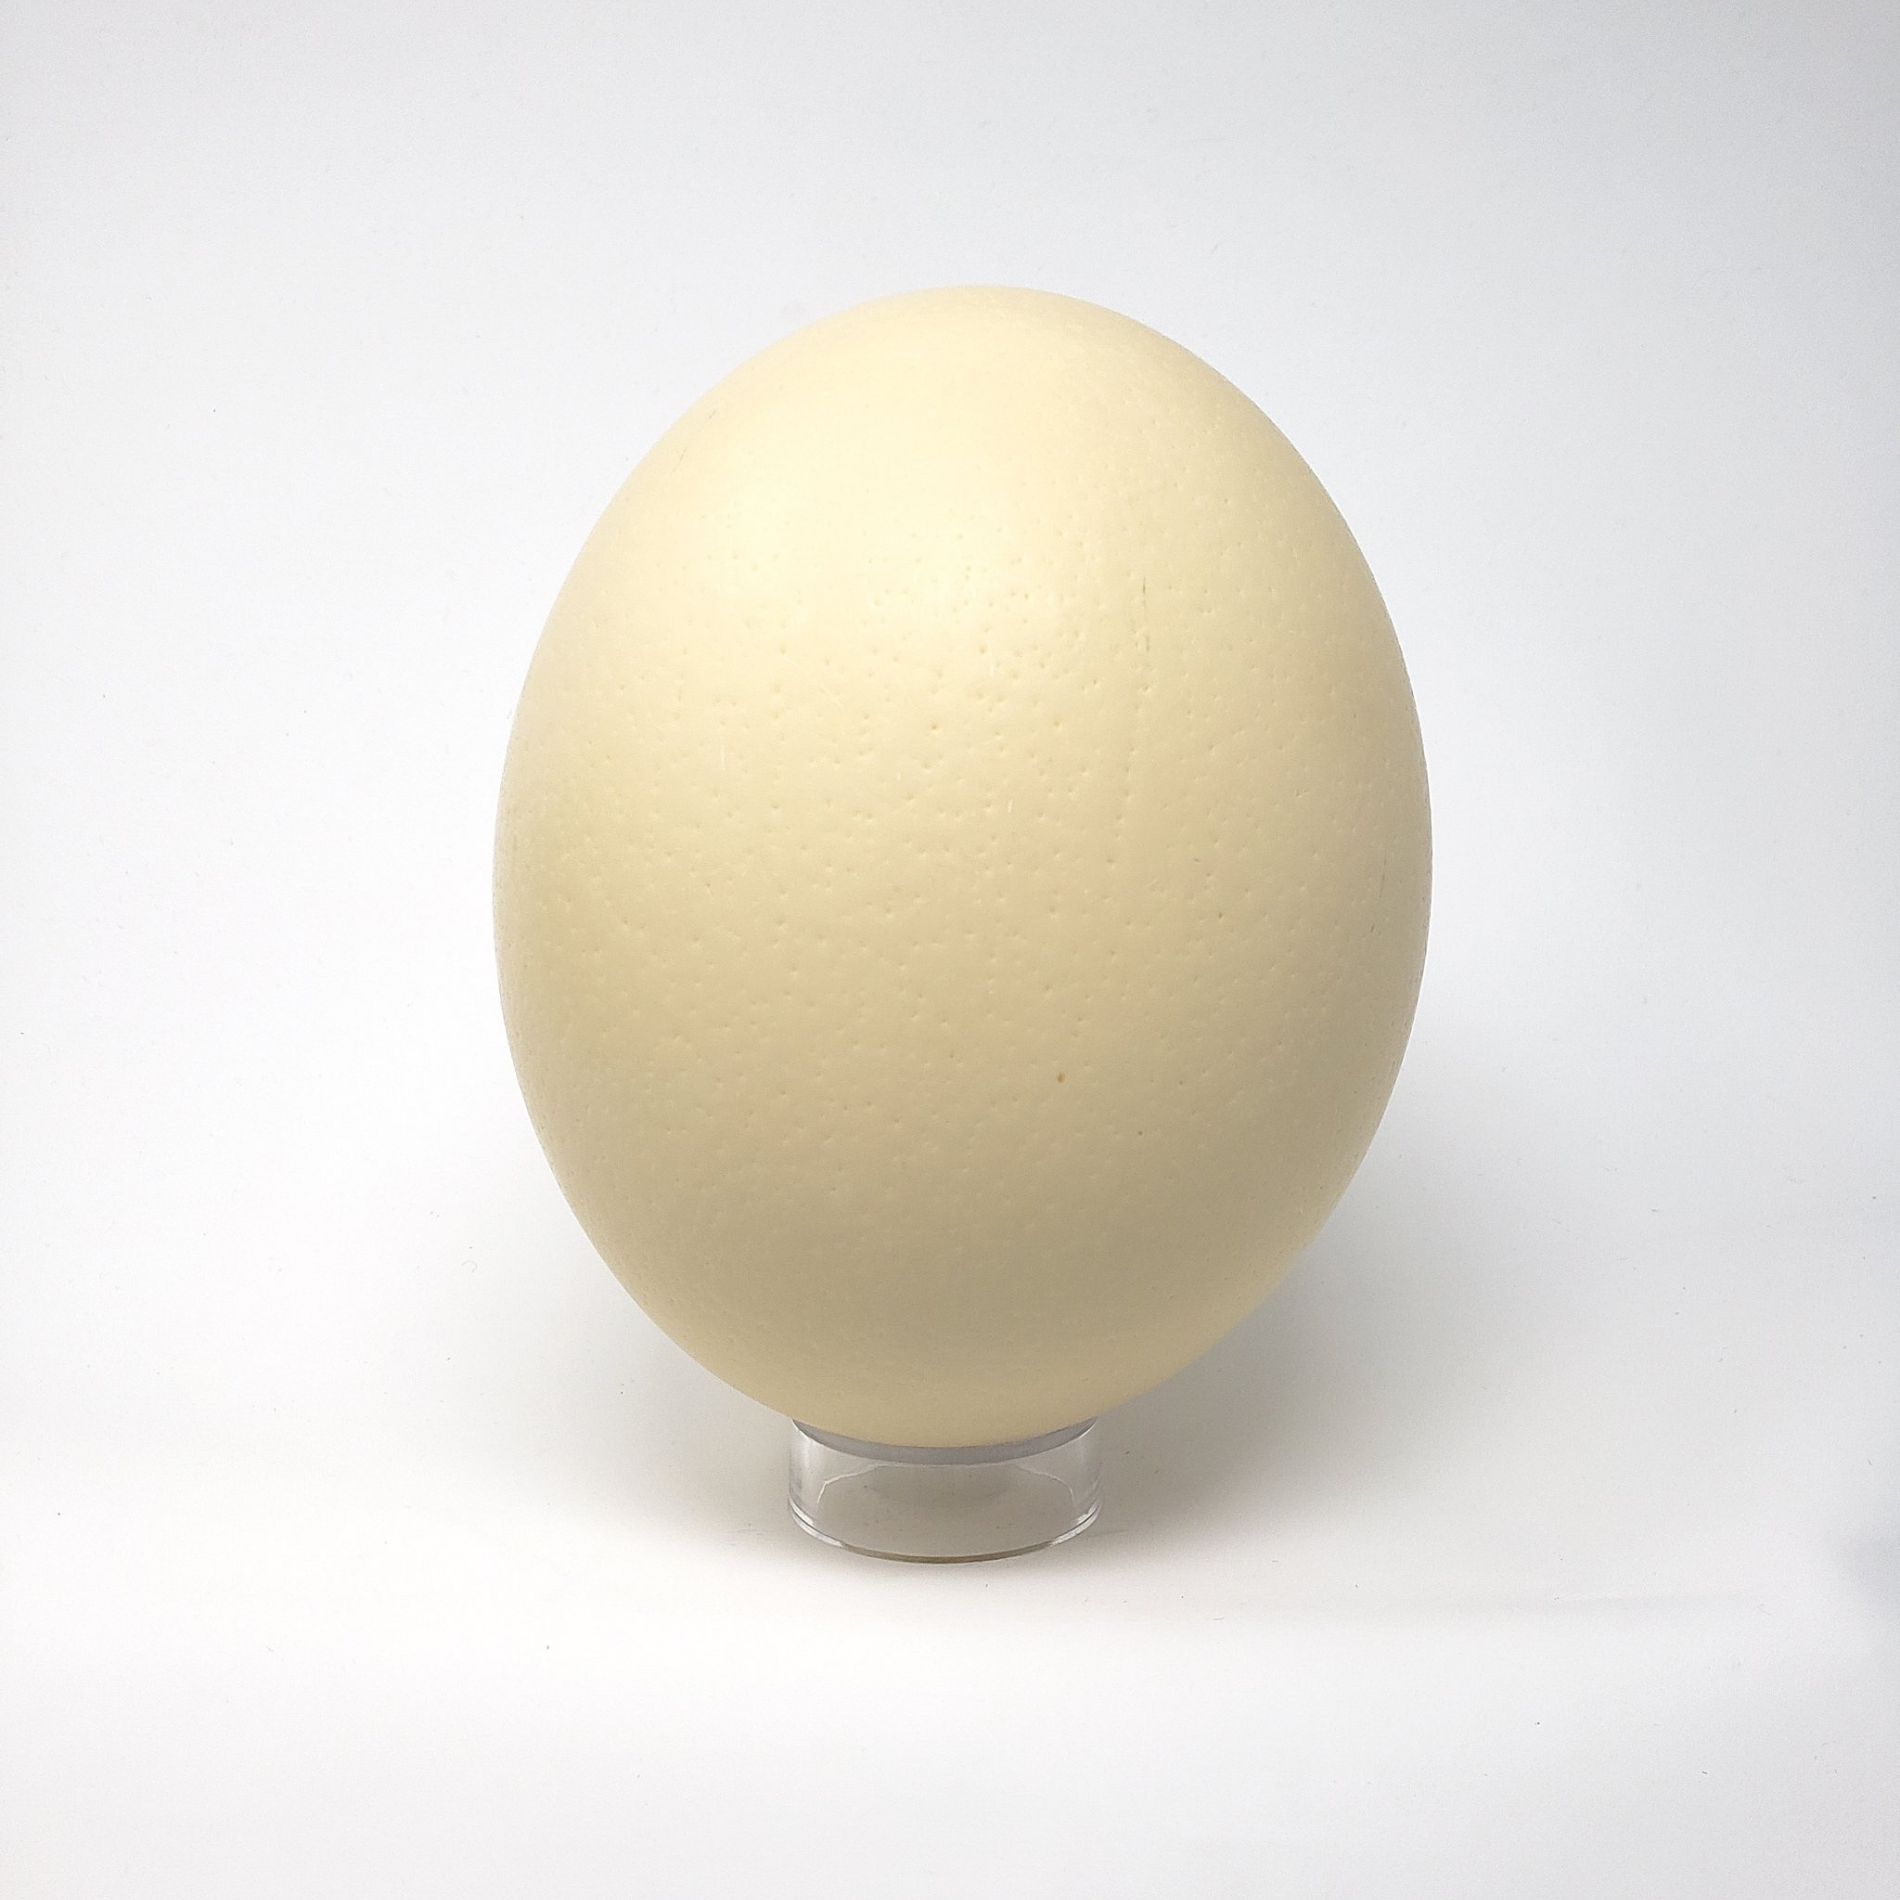 acrylic ostrich eggshell stand